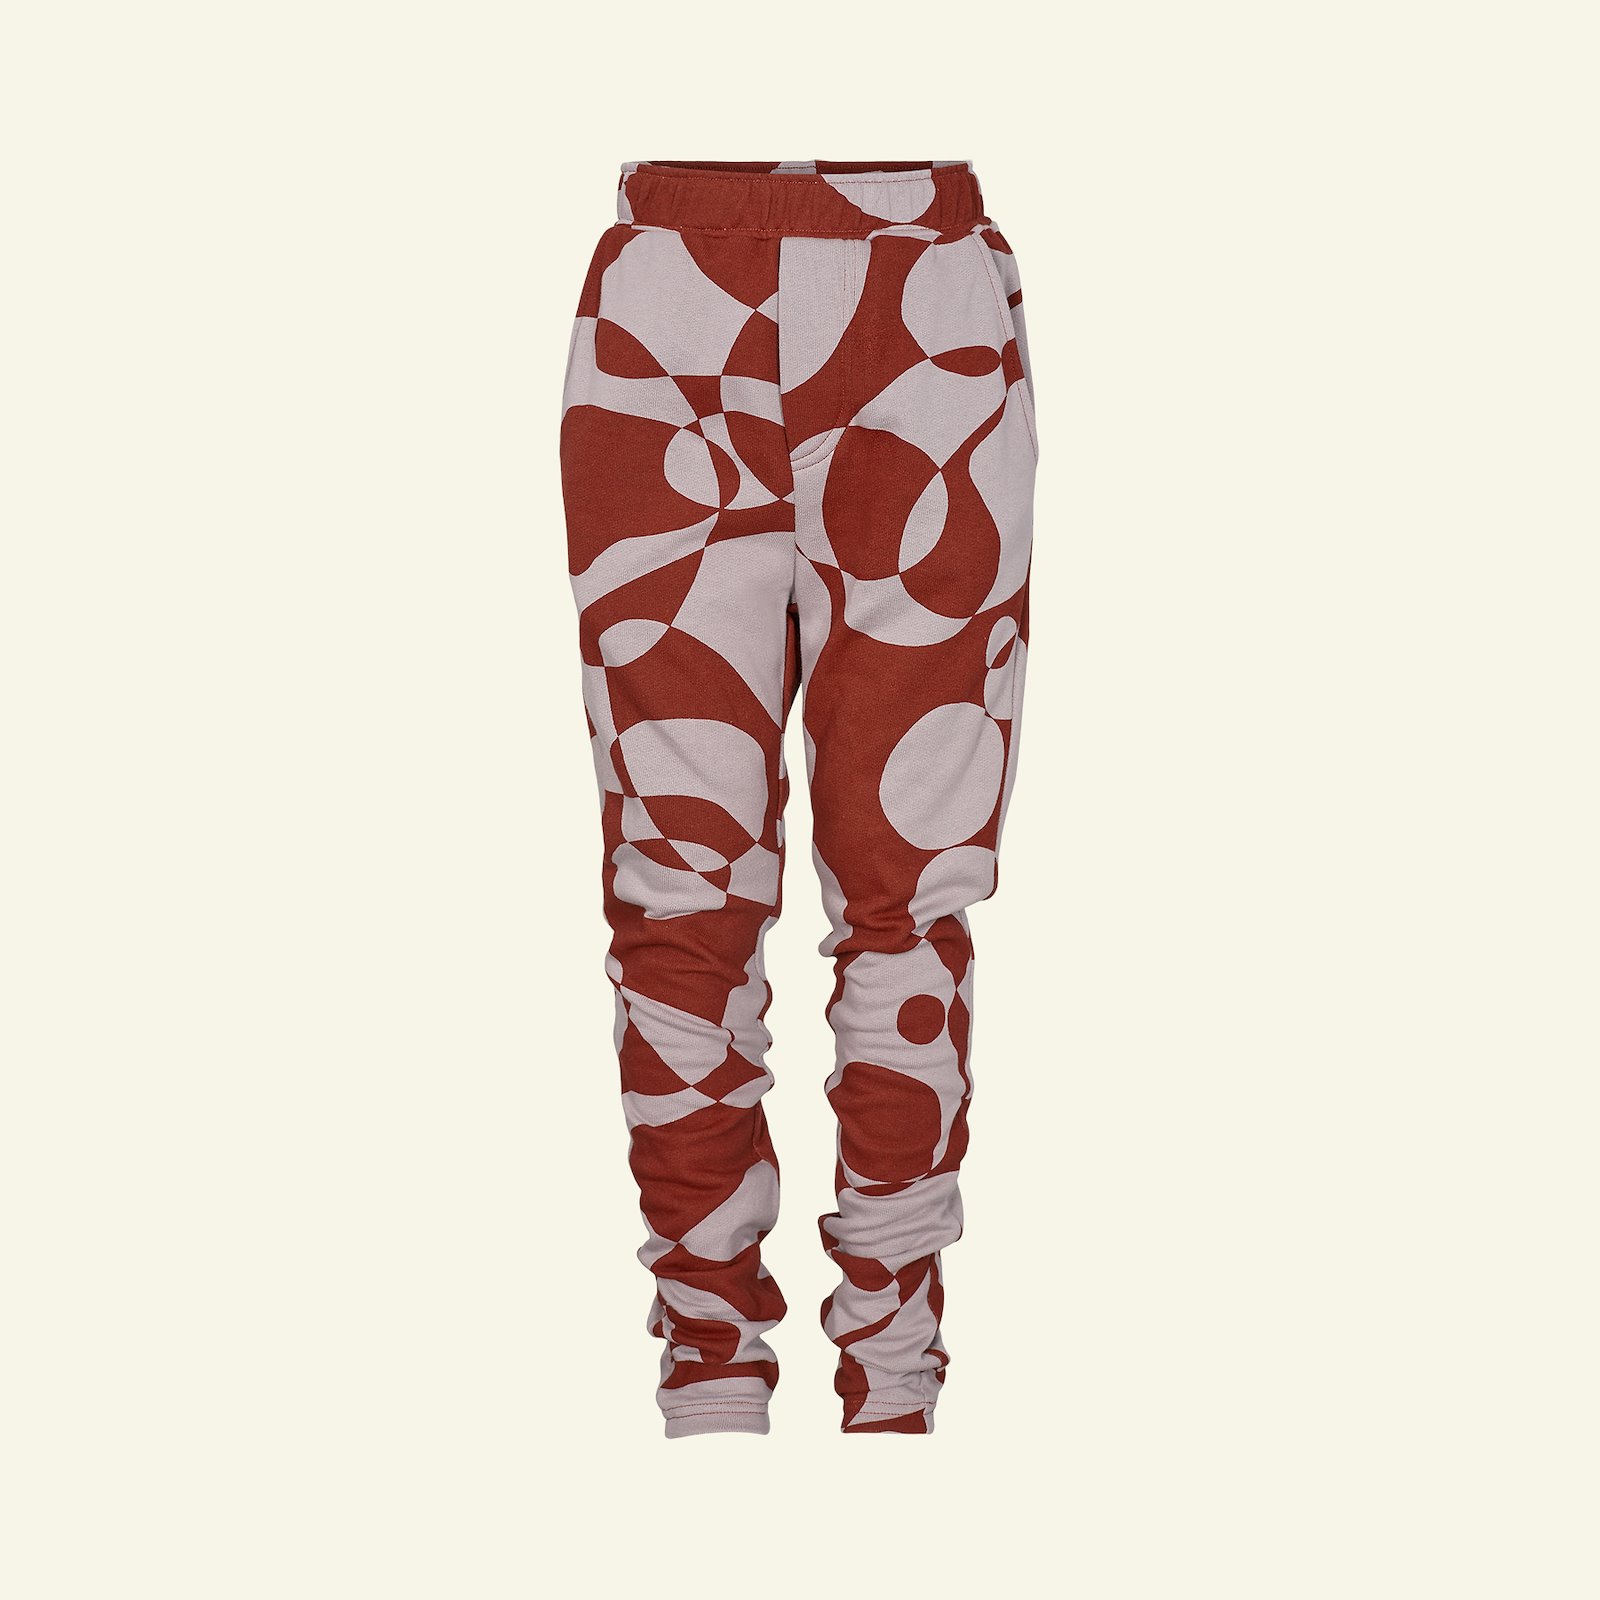 Trousers, 128/8y p60035_211818_sskit